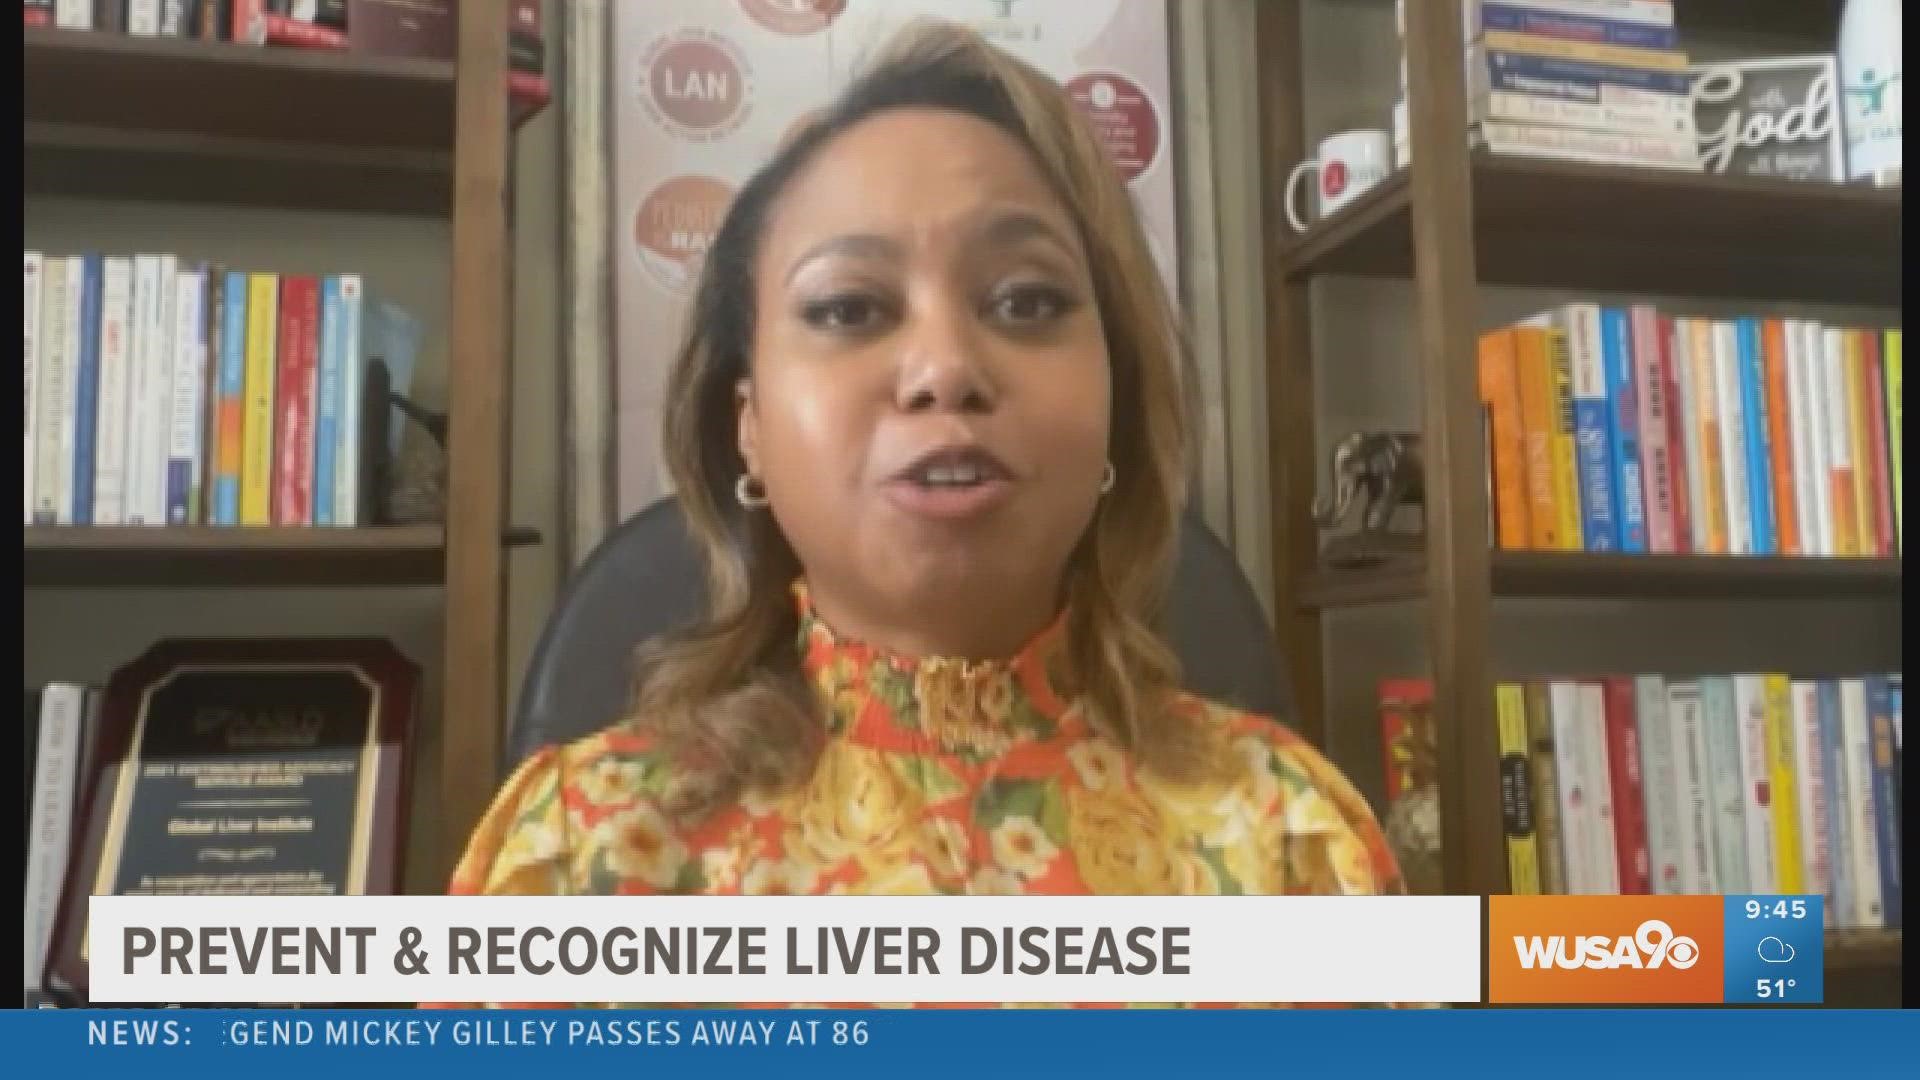 President and CEO of the Global Liver Institute, Donna Cryer, shares with us how to prevent and recognize liver disease.